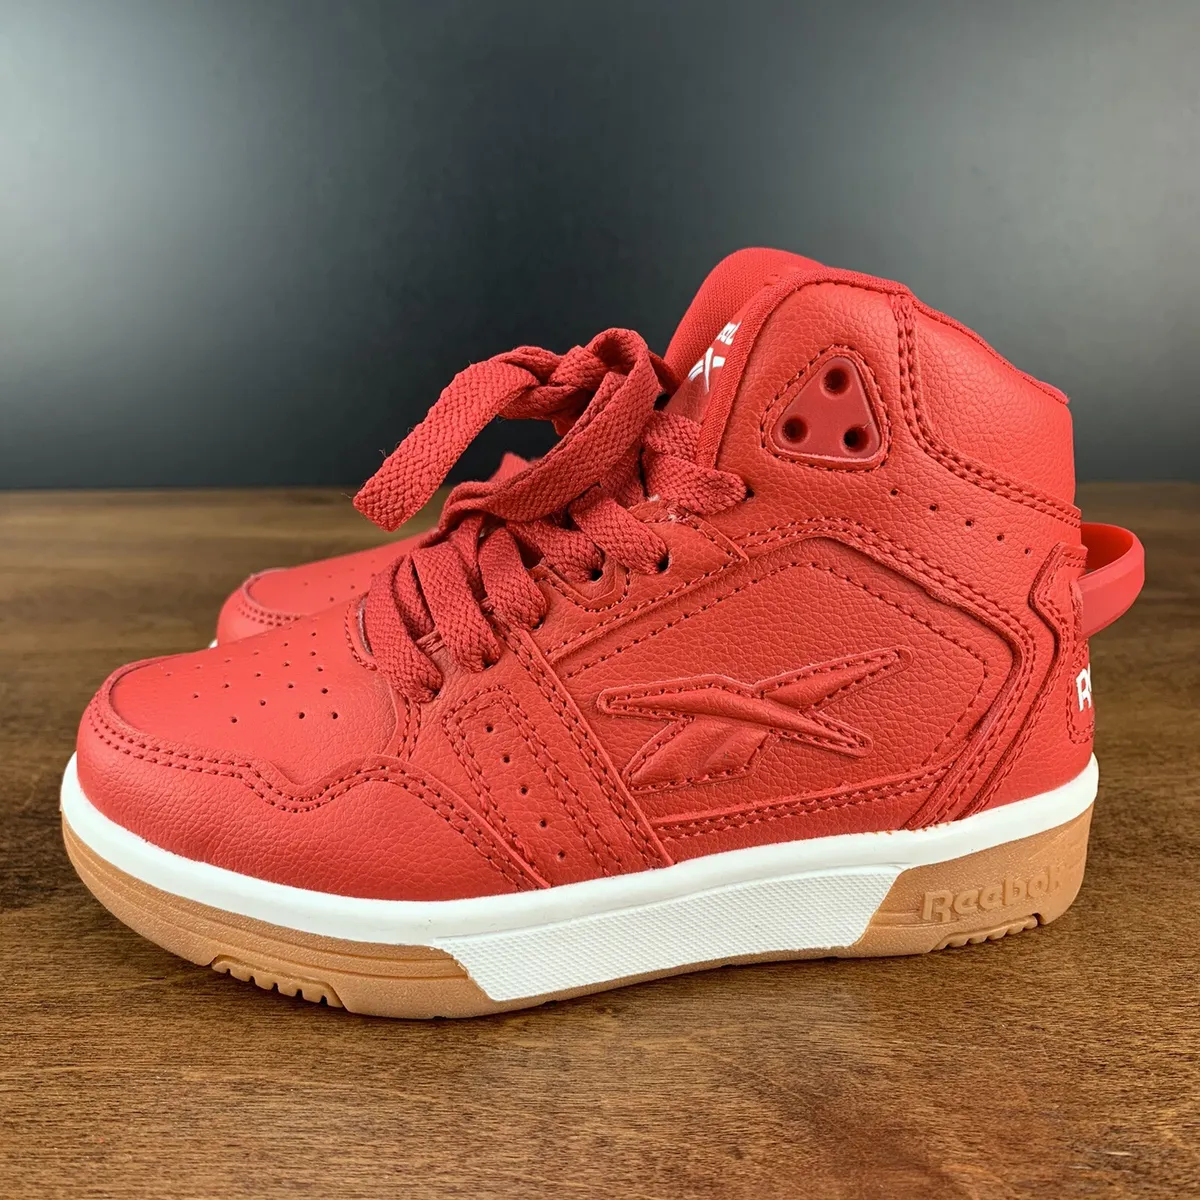 T Volverse loco cemento Reebok Classic Boys Size 11K Red High Top Lace Up Sneaker Shoes | eBay